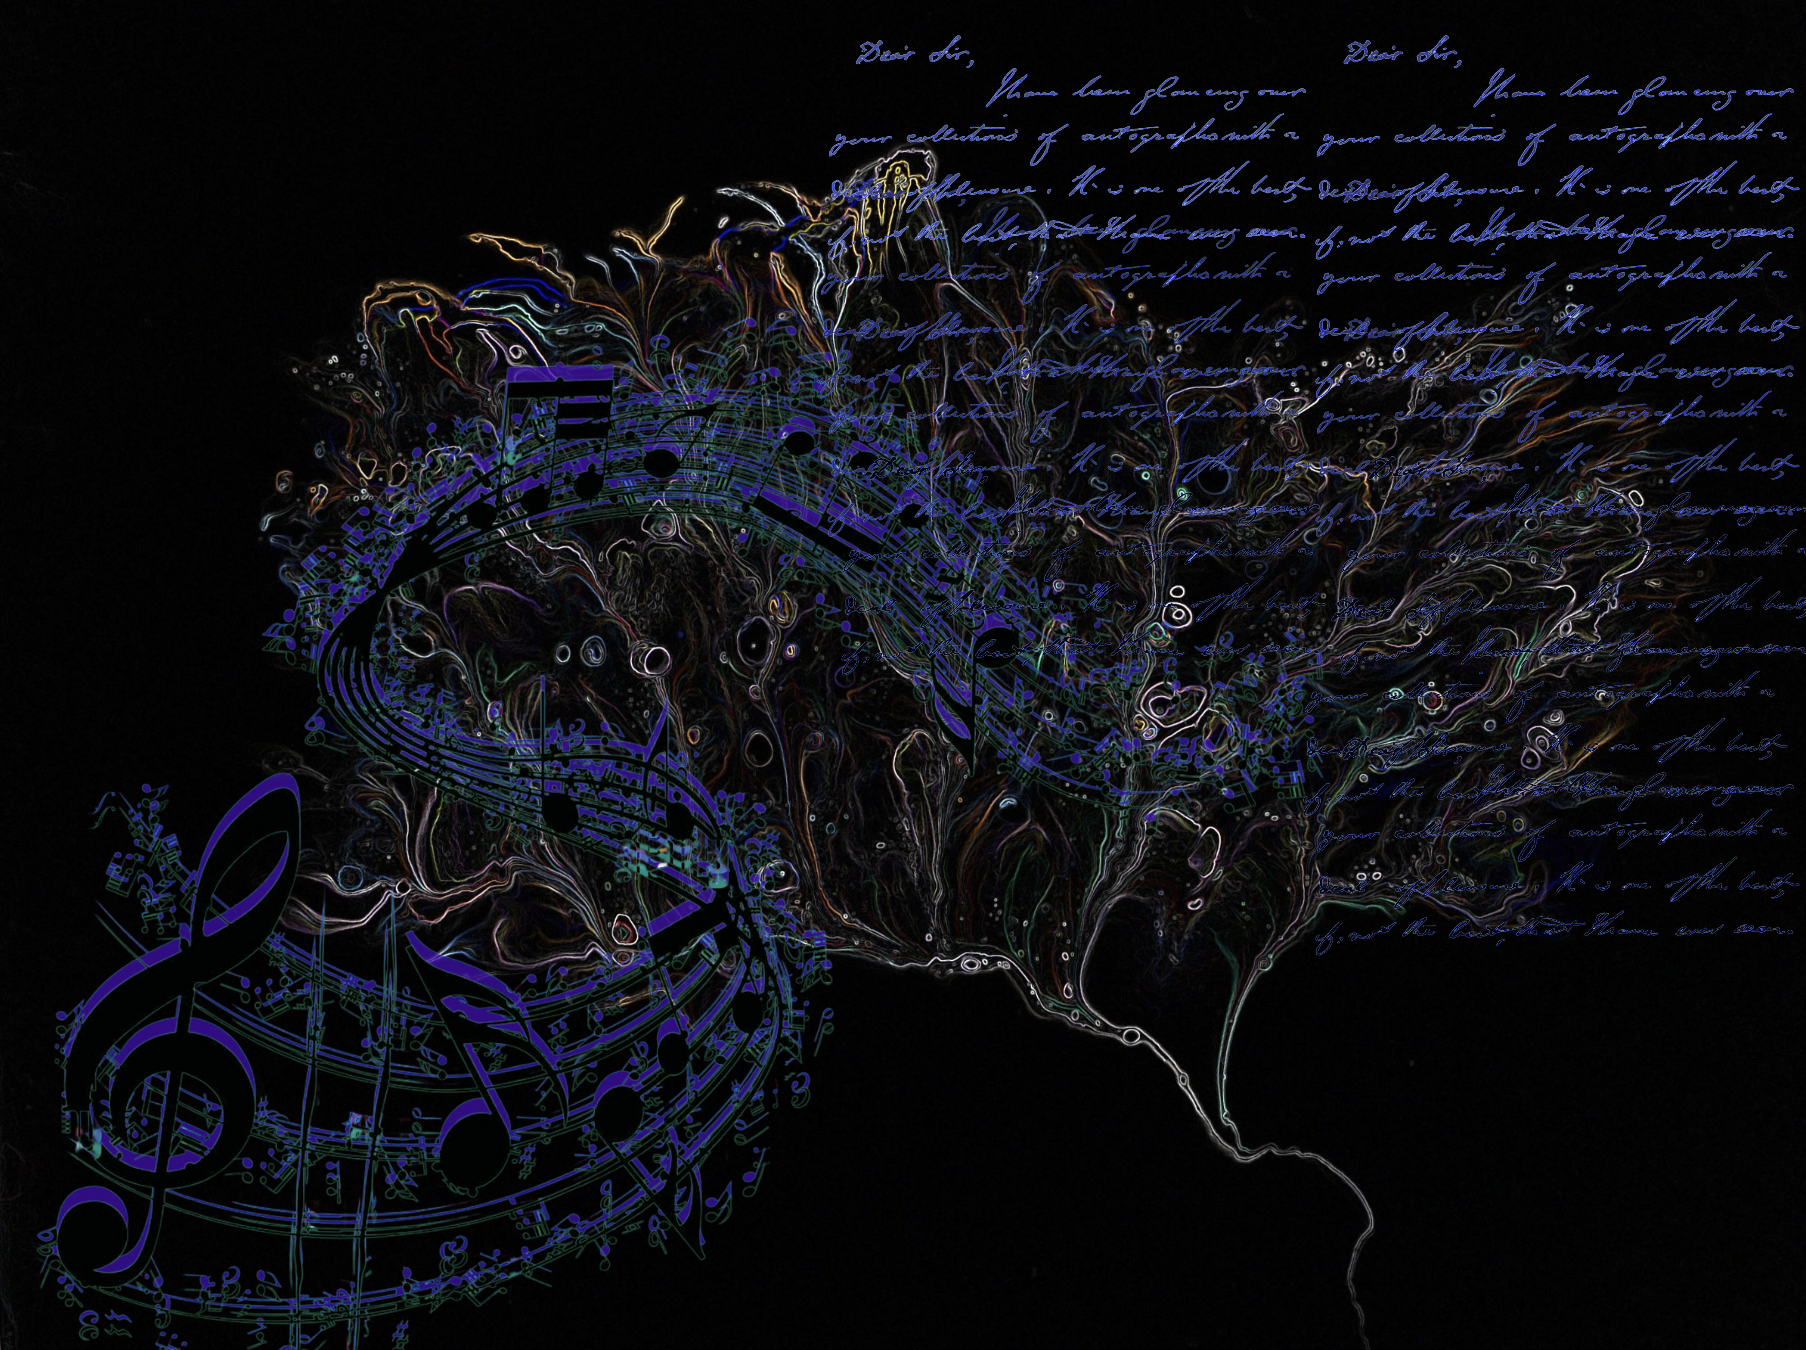 Multimodel Machine Learning models with Comet ML, black background witha wave of musical notes and cursive handwritten script overlaid over an artistic representation of a tree.